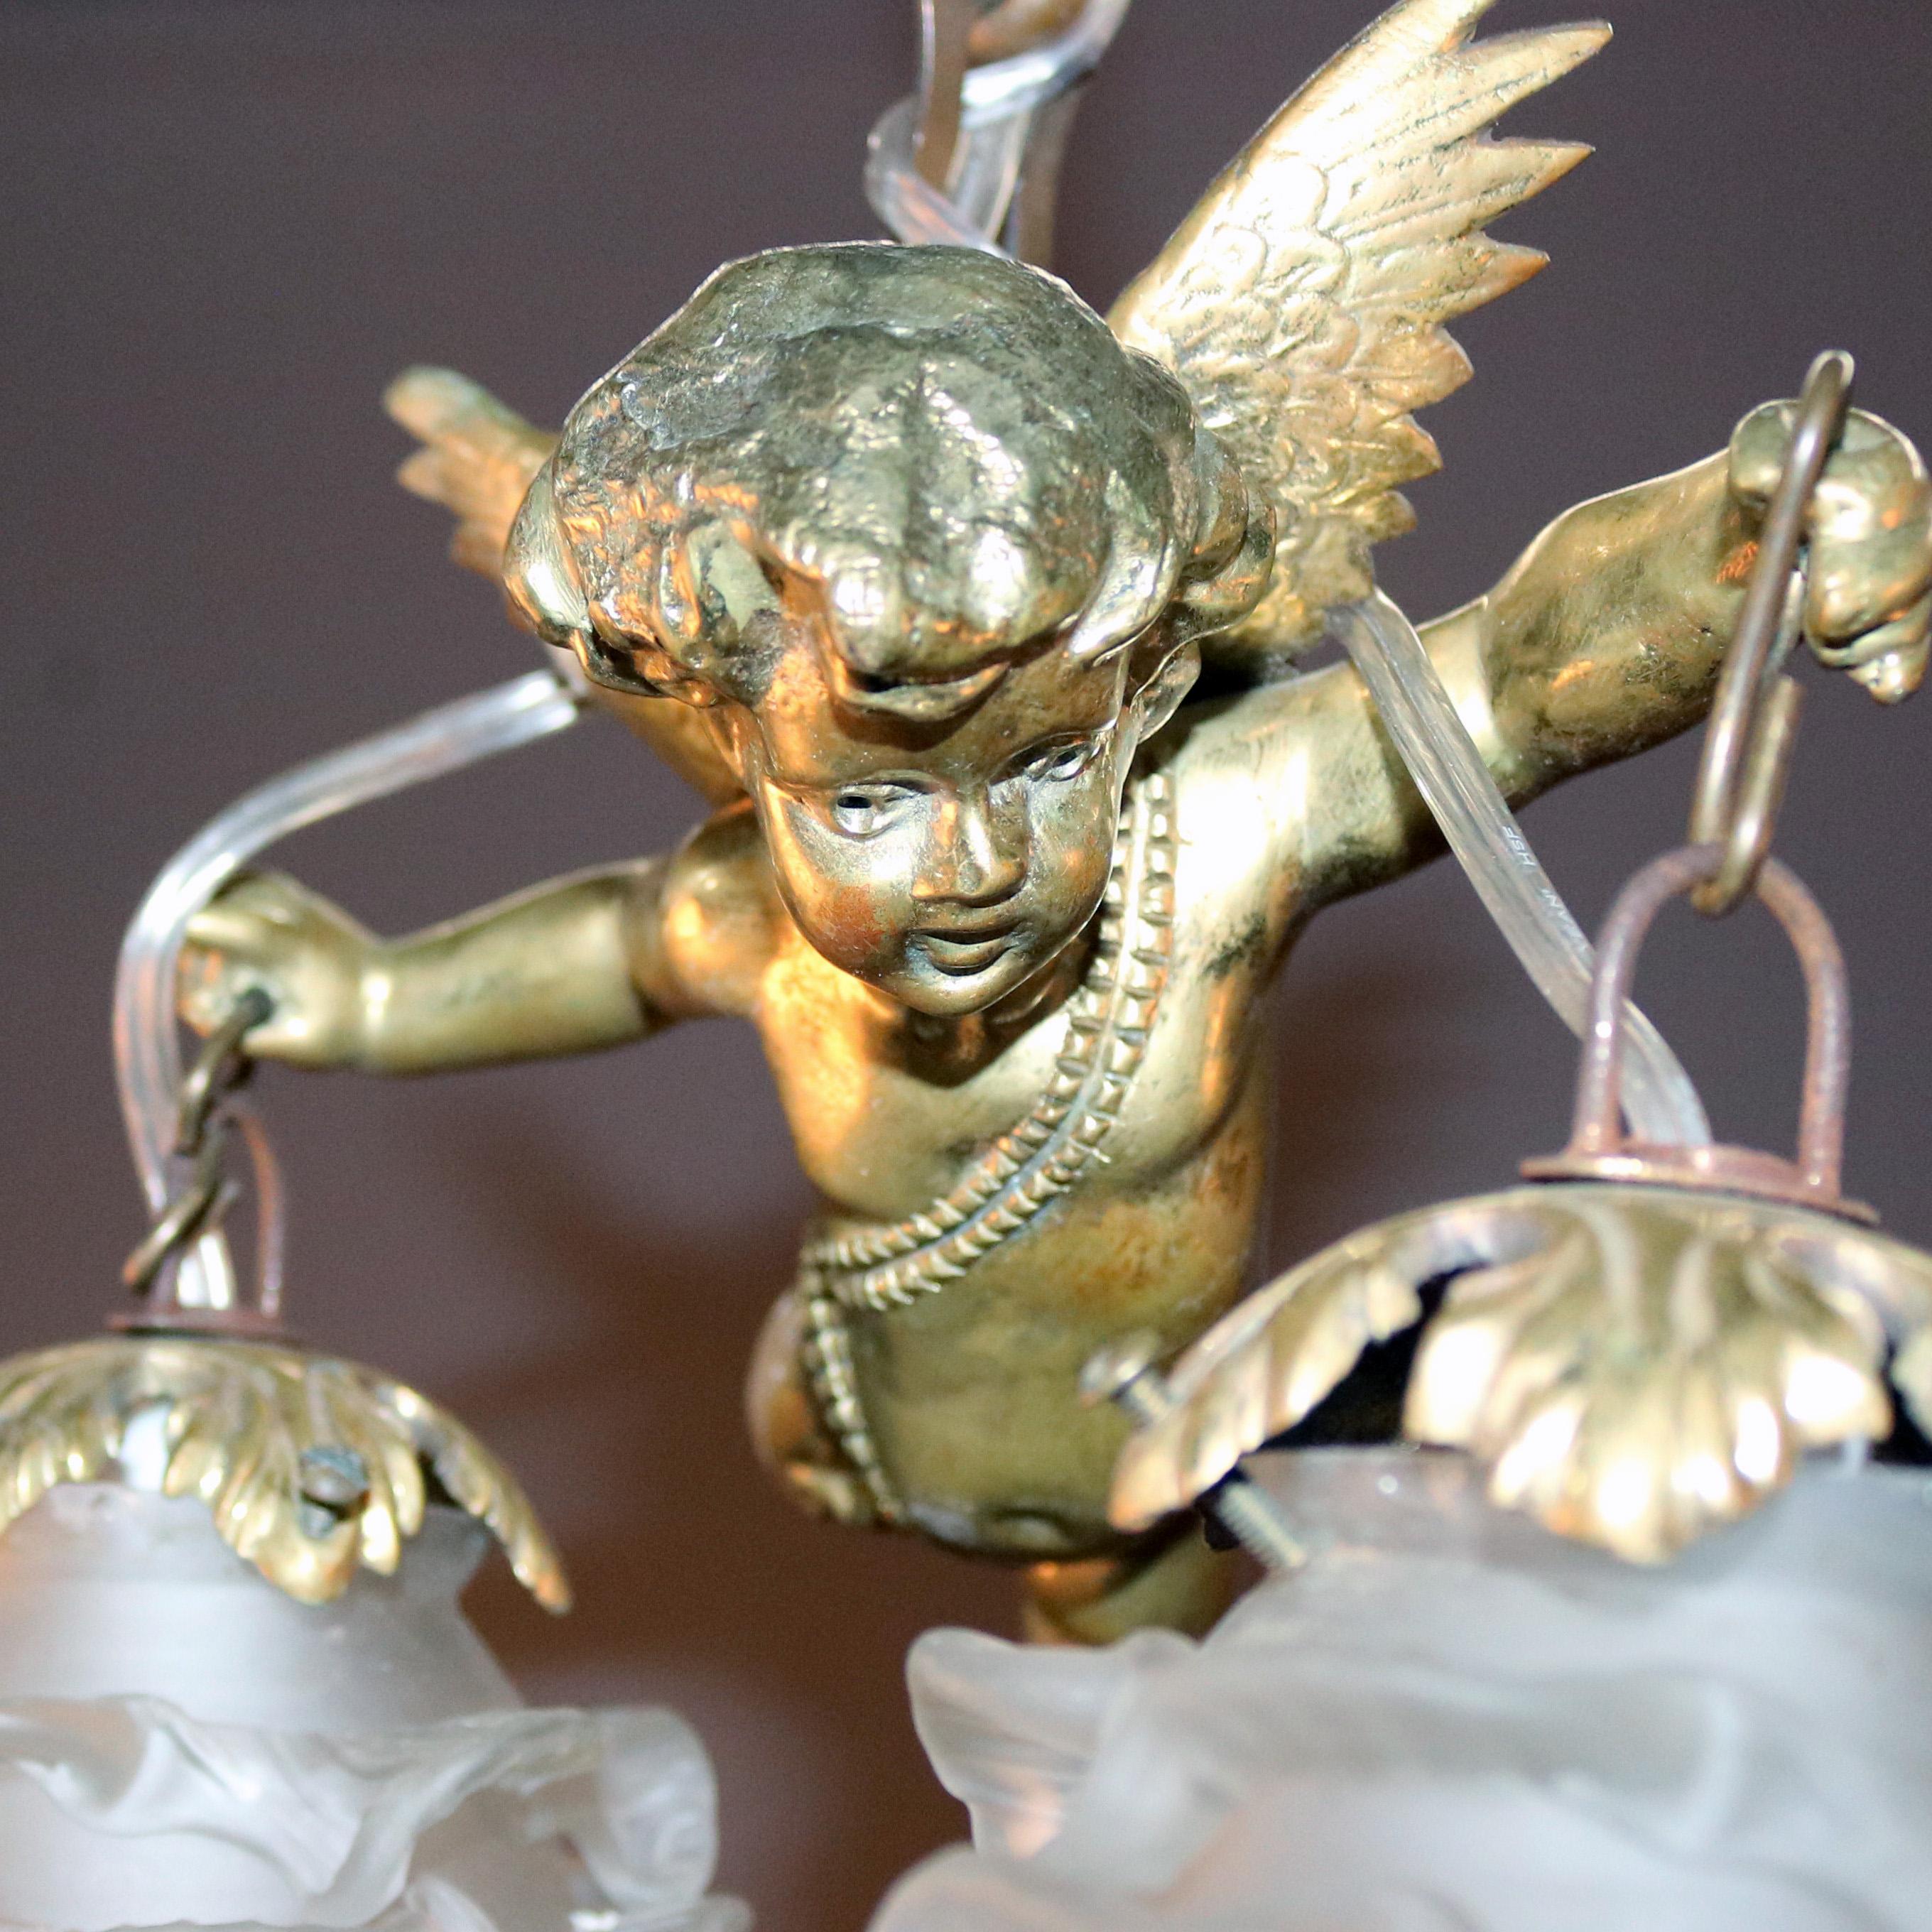 An antique figural gilt bronze hanging light fixture features cherub in flight holding foliate drop light in each hand with frosted glass floral form shades, circa 1920.

Measures: 17.5” H x 8.4” D.